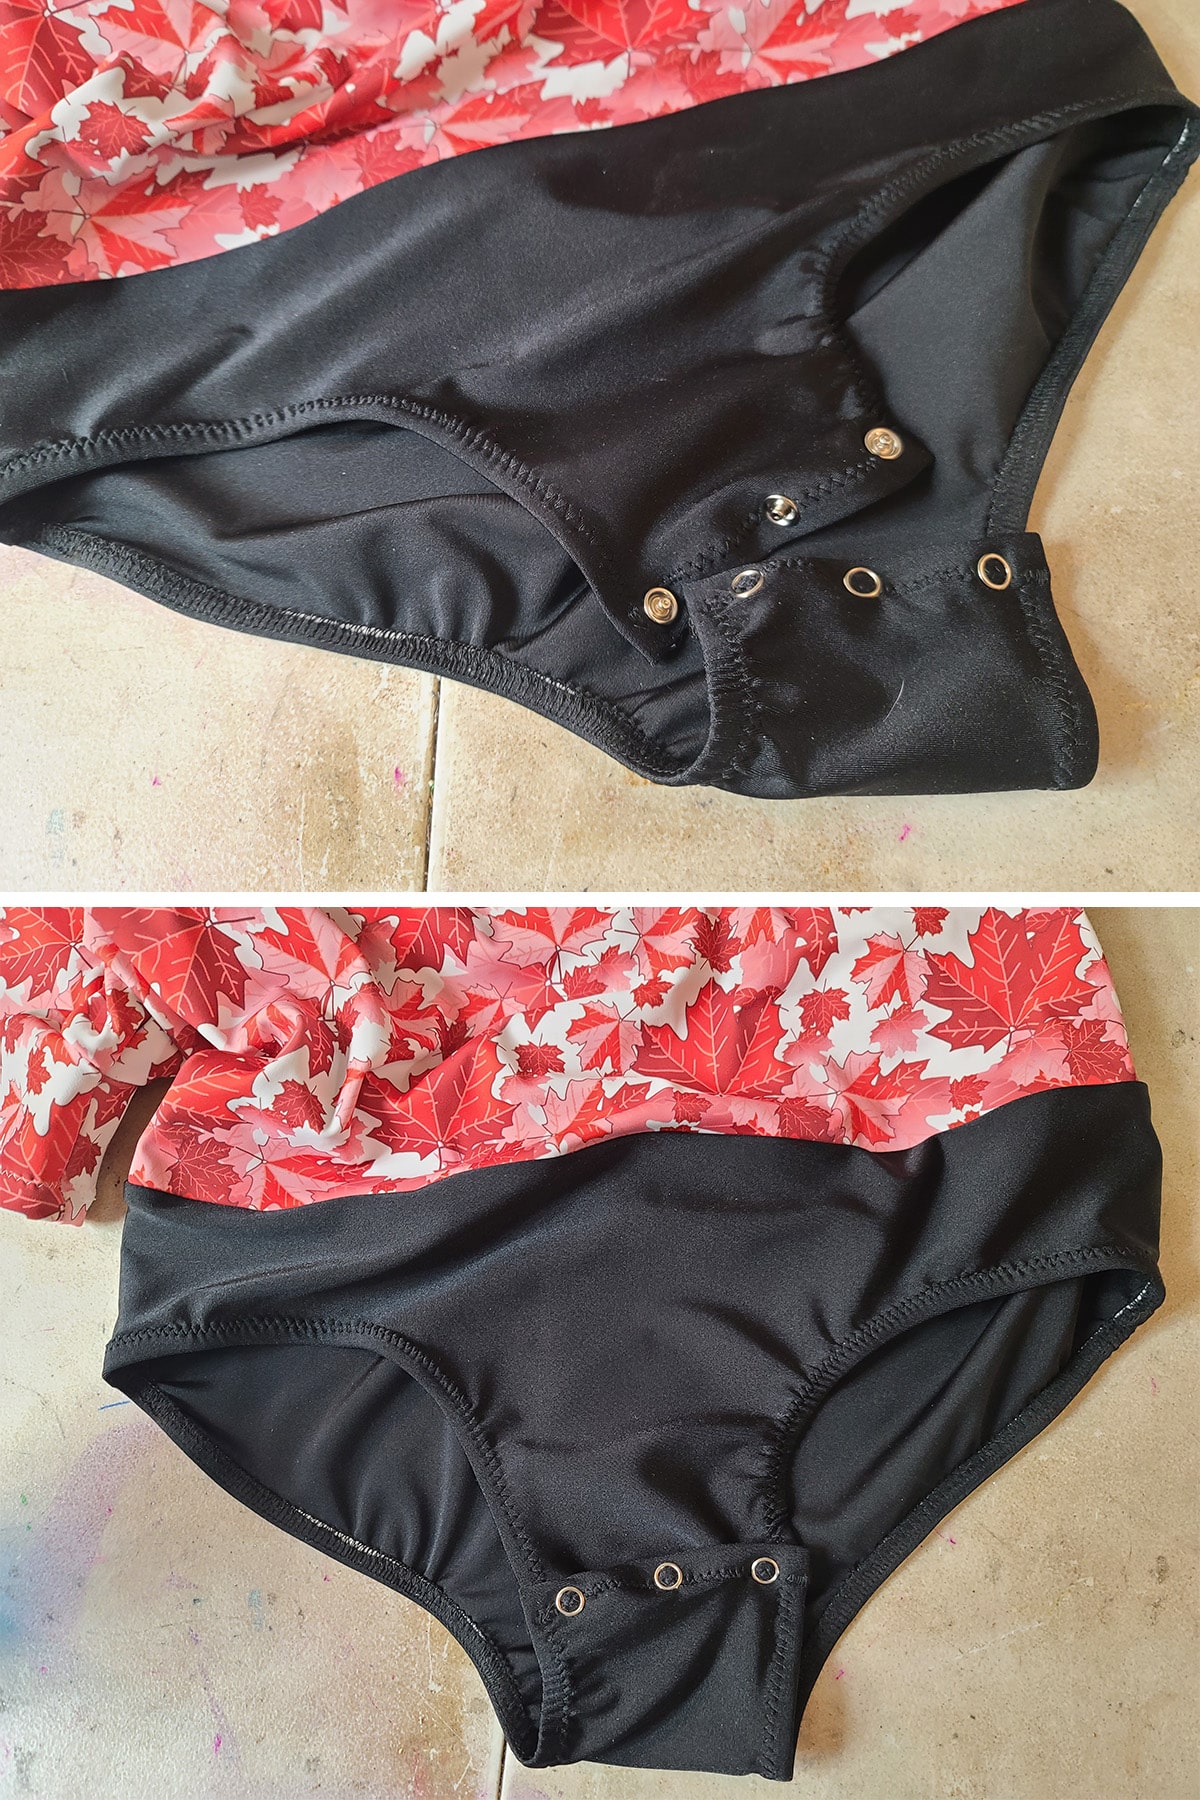 A 2 part image showing the men's body shirt with the snaps fully installed and fastened.